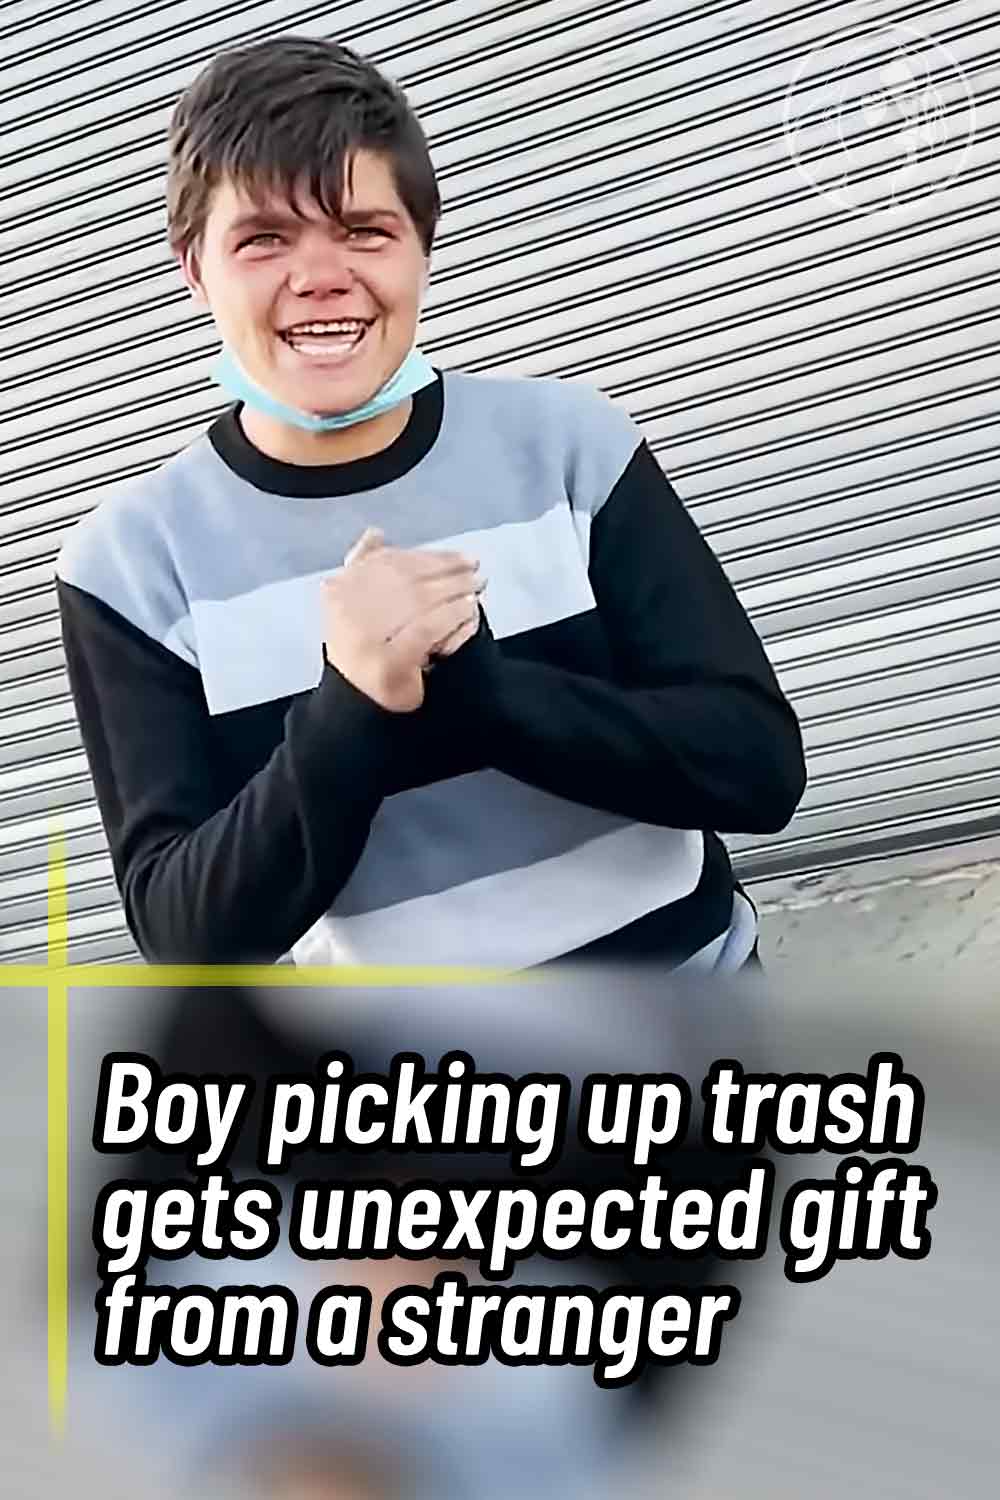 Boy picking up trash gets unexpected gift from a stranger